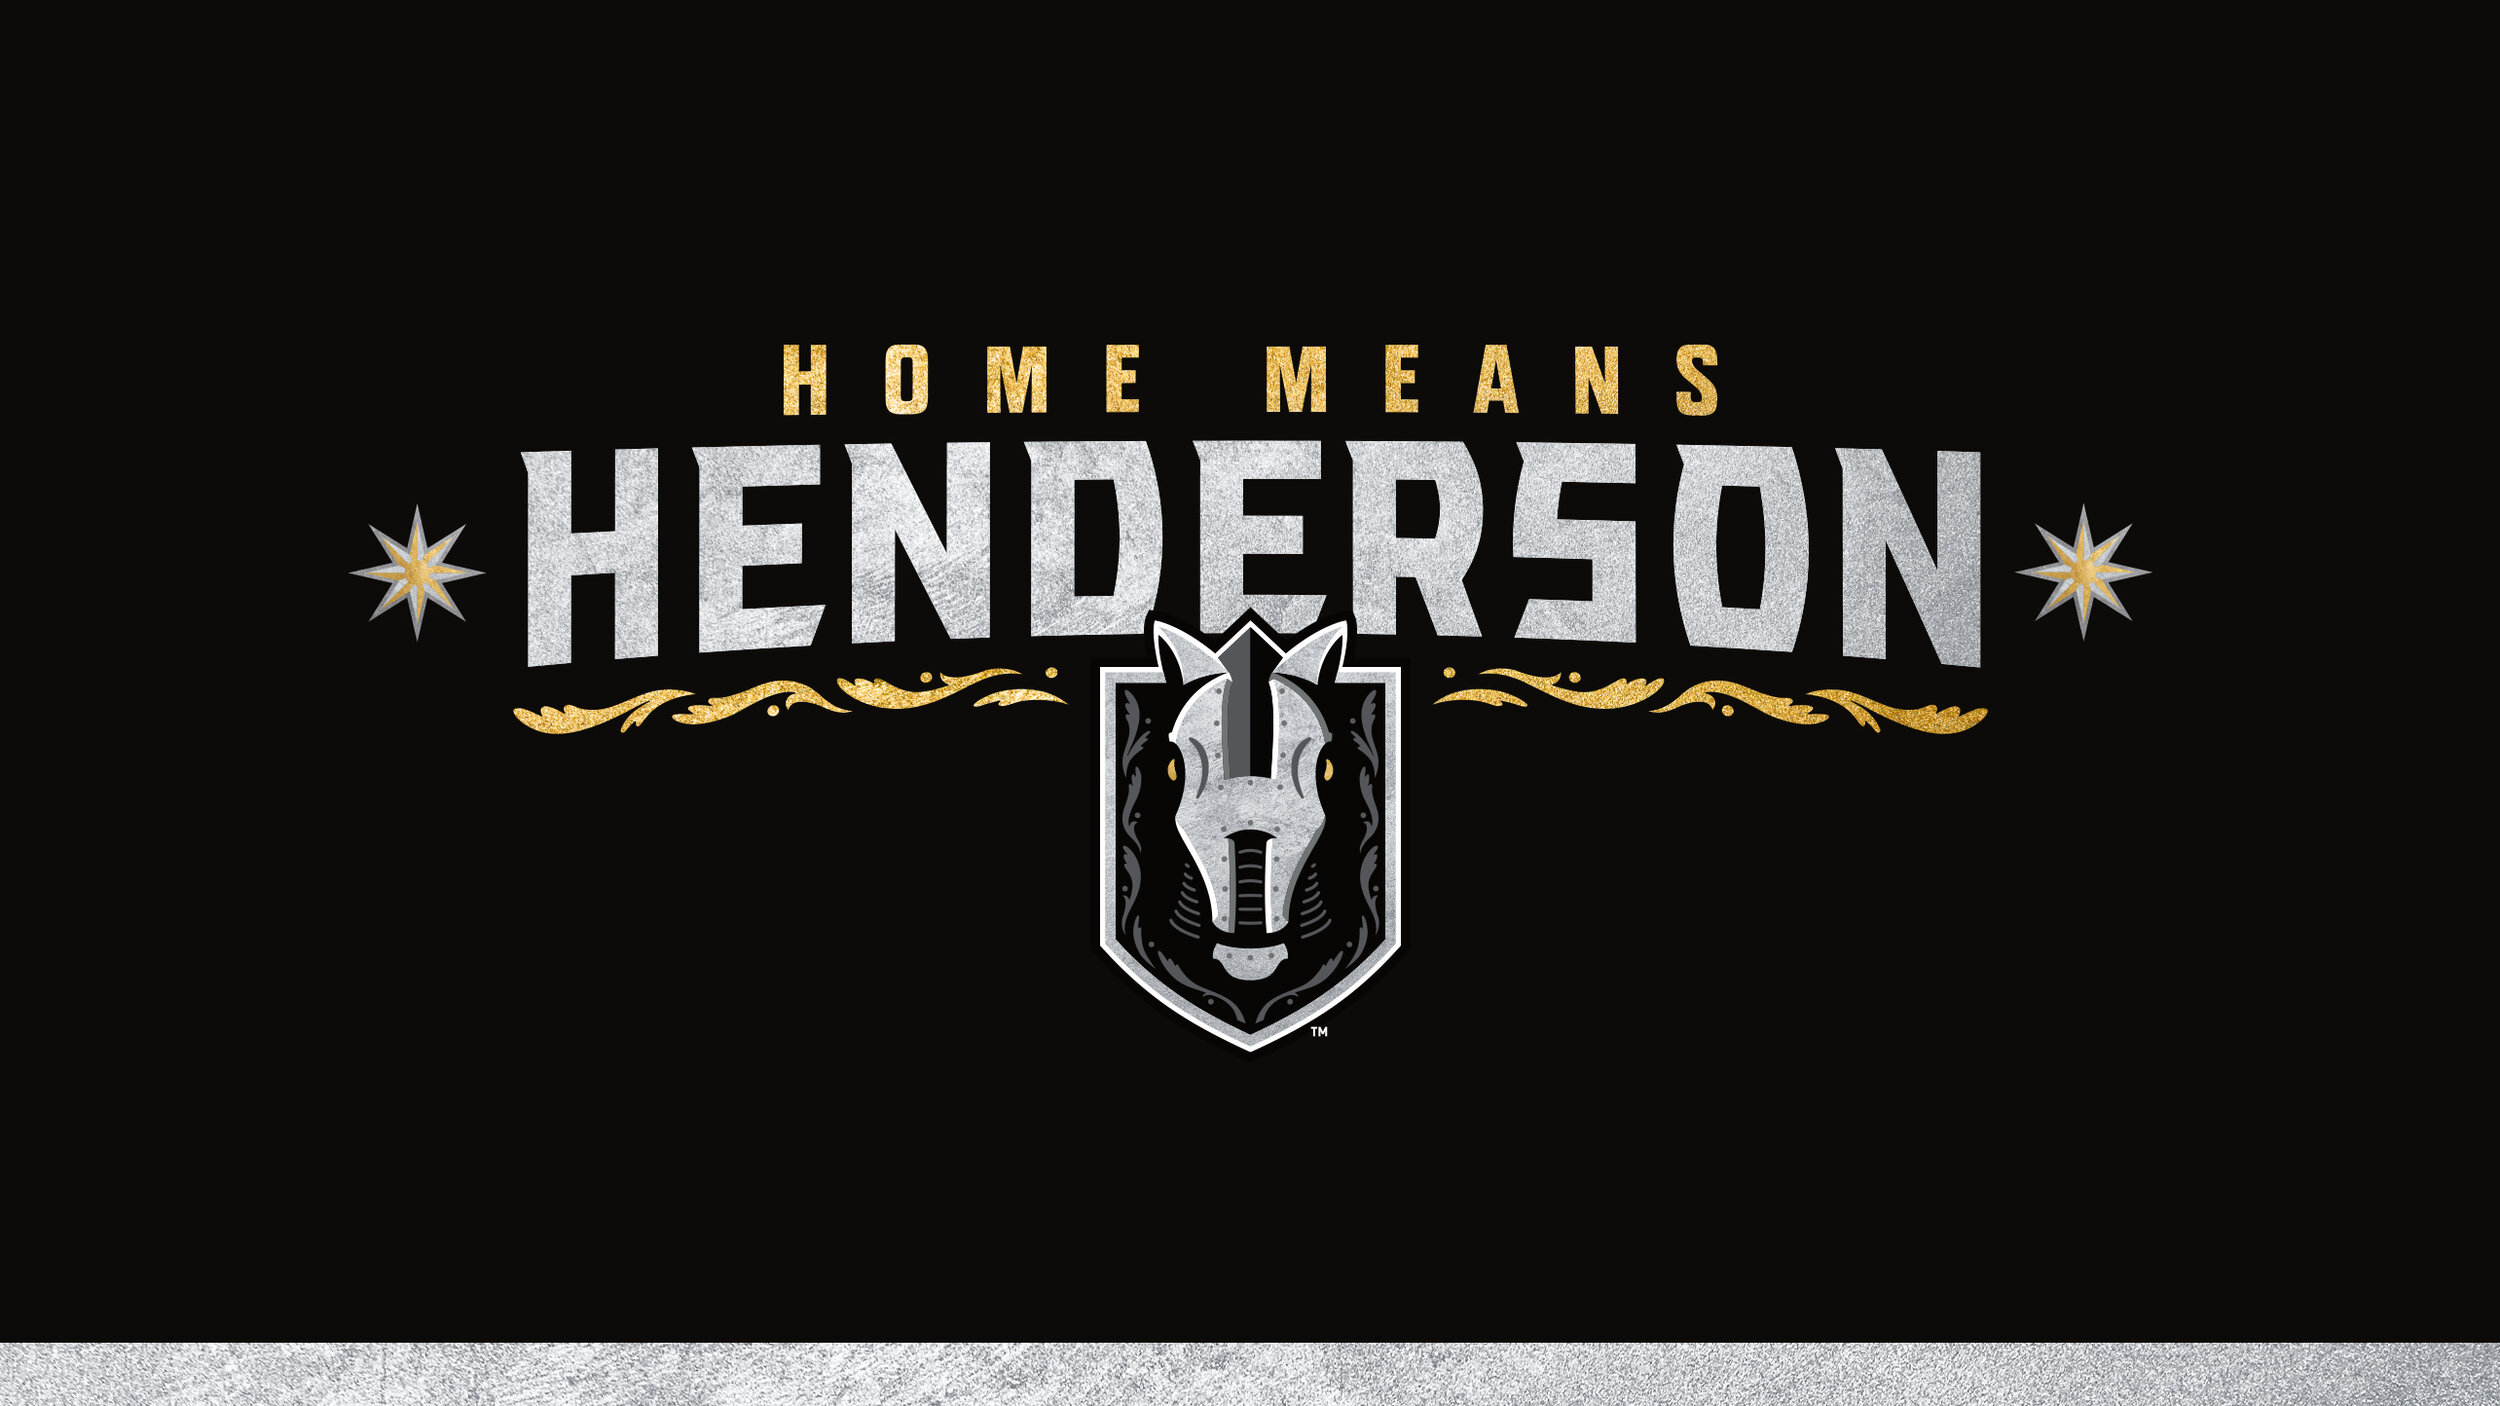 Henderson Silver Knights Unveil Logo, New Affiliate of Vegas